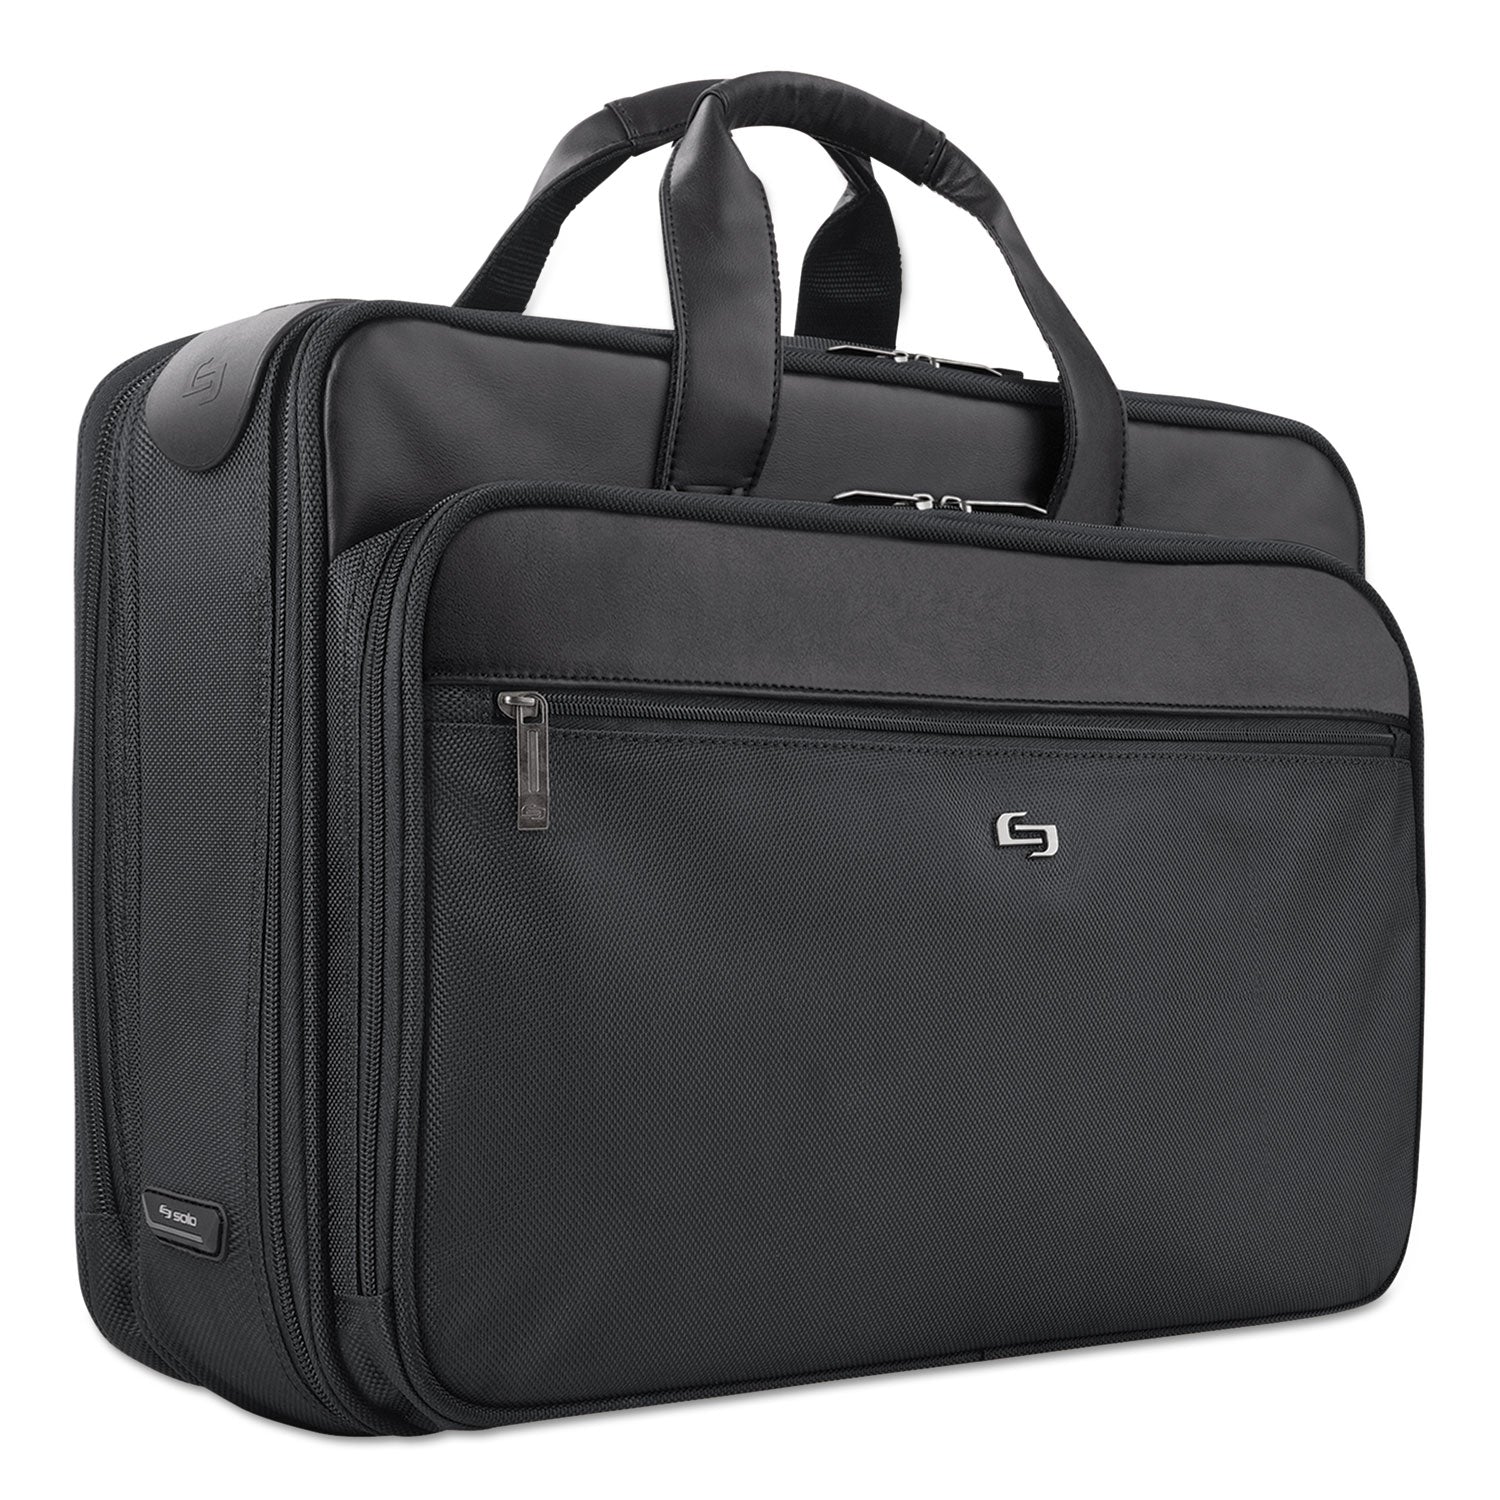 Classic Smart Strap Briefcase, Fits Devices Up to 16", Ballistic Polyester, 17.5 x 5.5 x 12, Black - 